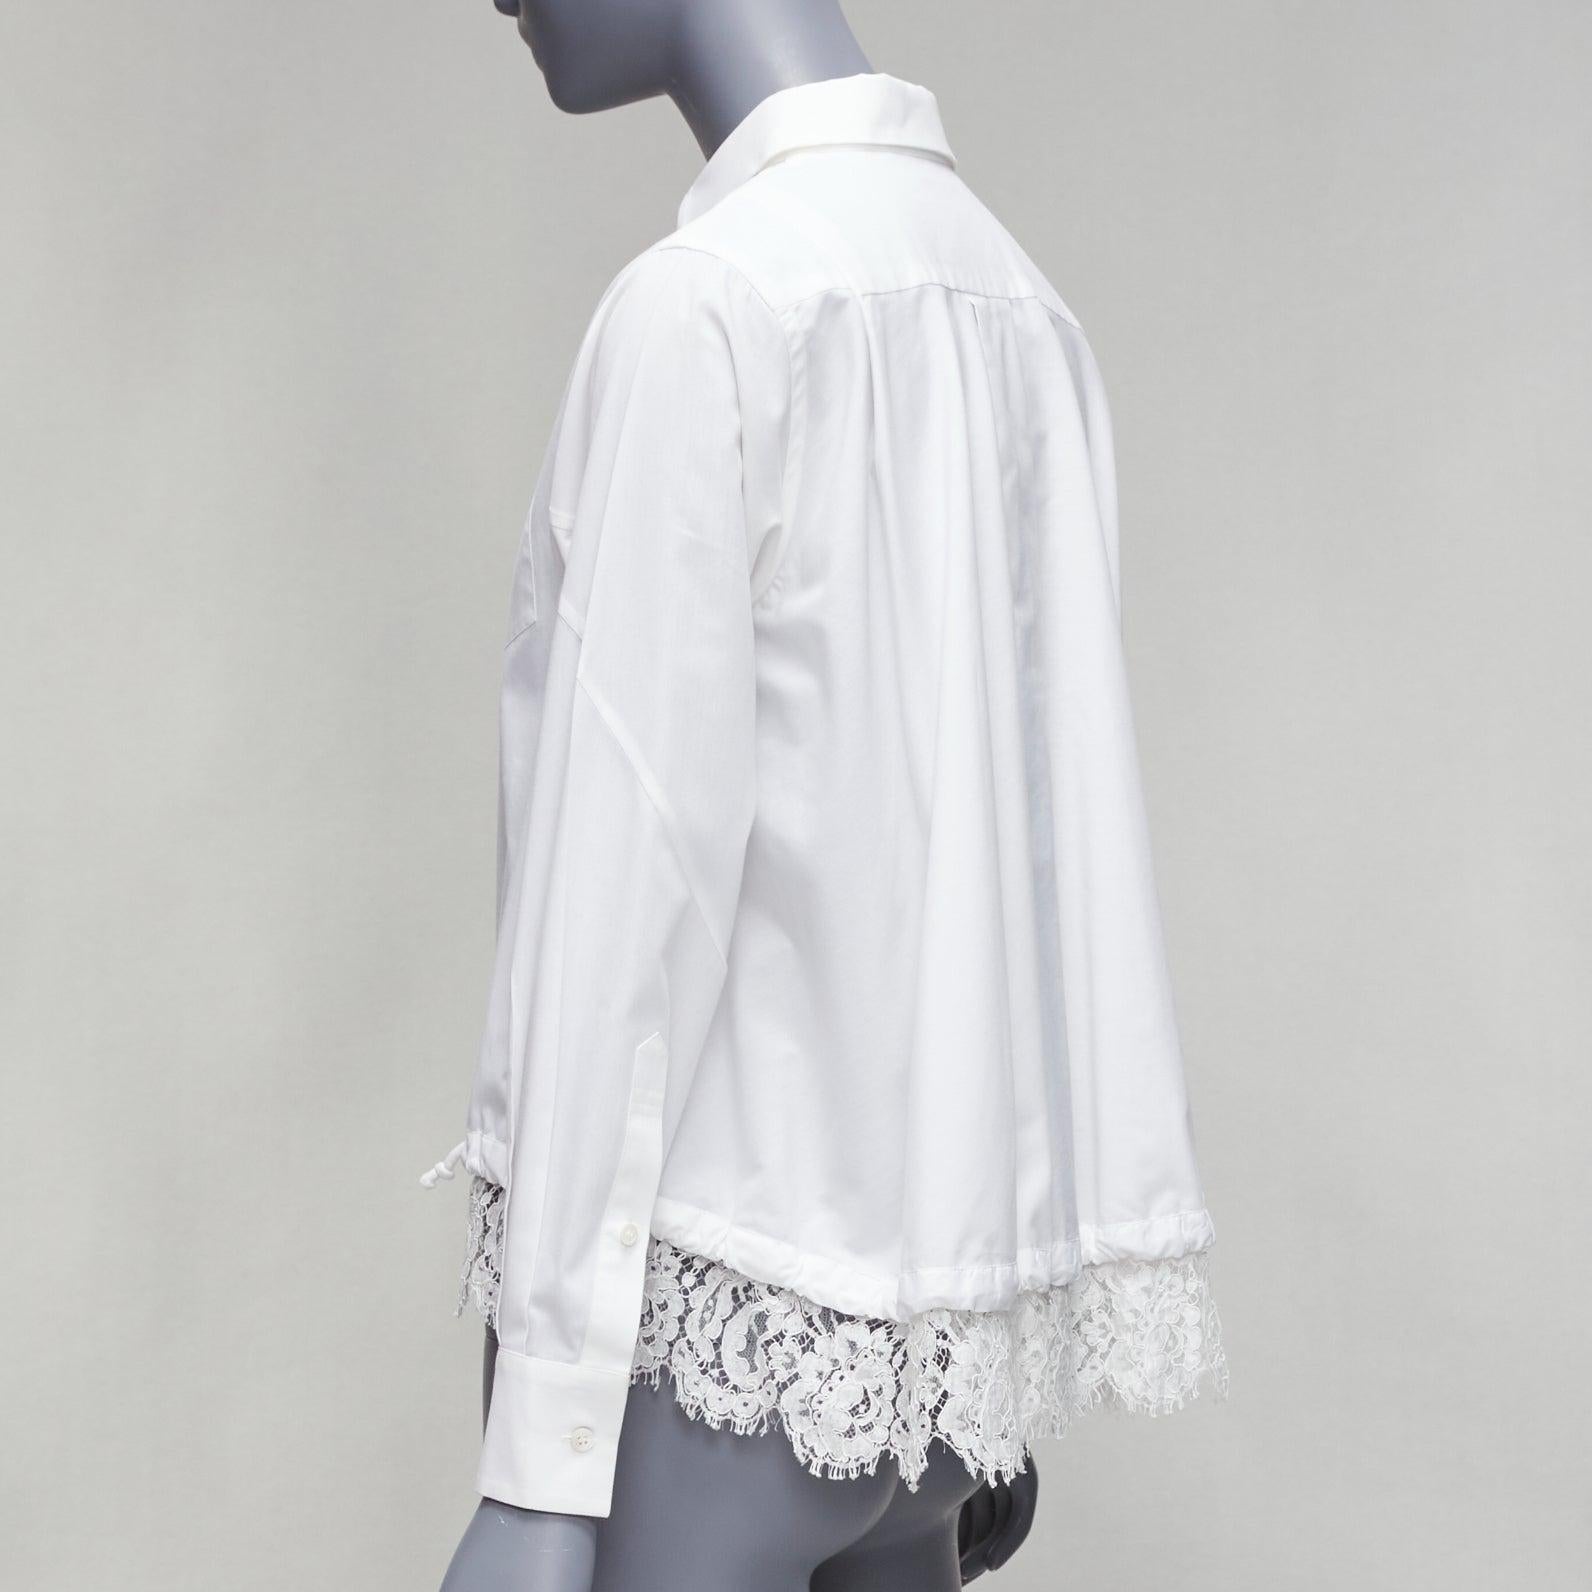 SACAI 2015 white floral lace hem bungee cord pocketed cropped shirt JP1 S
Reference: EALU/A00003
Brand: Sacai
Collection: 2015
Material: Polyester, Blend
Color: White
Pattern: Lace
Closure: Button
Extra Details: Darted shoulders and pleats at